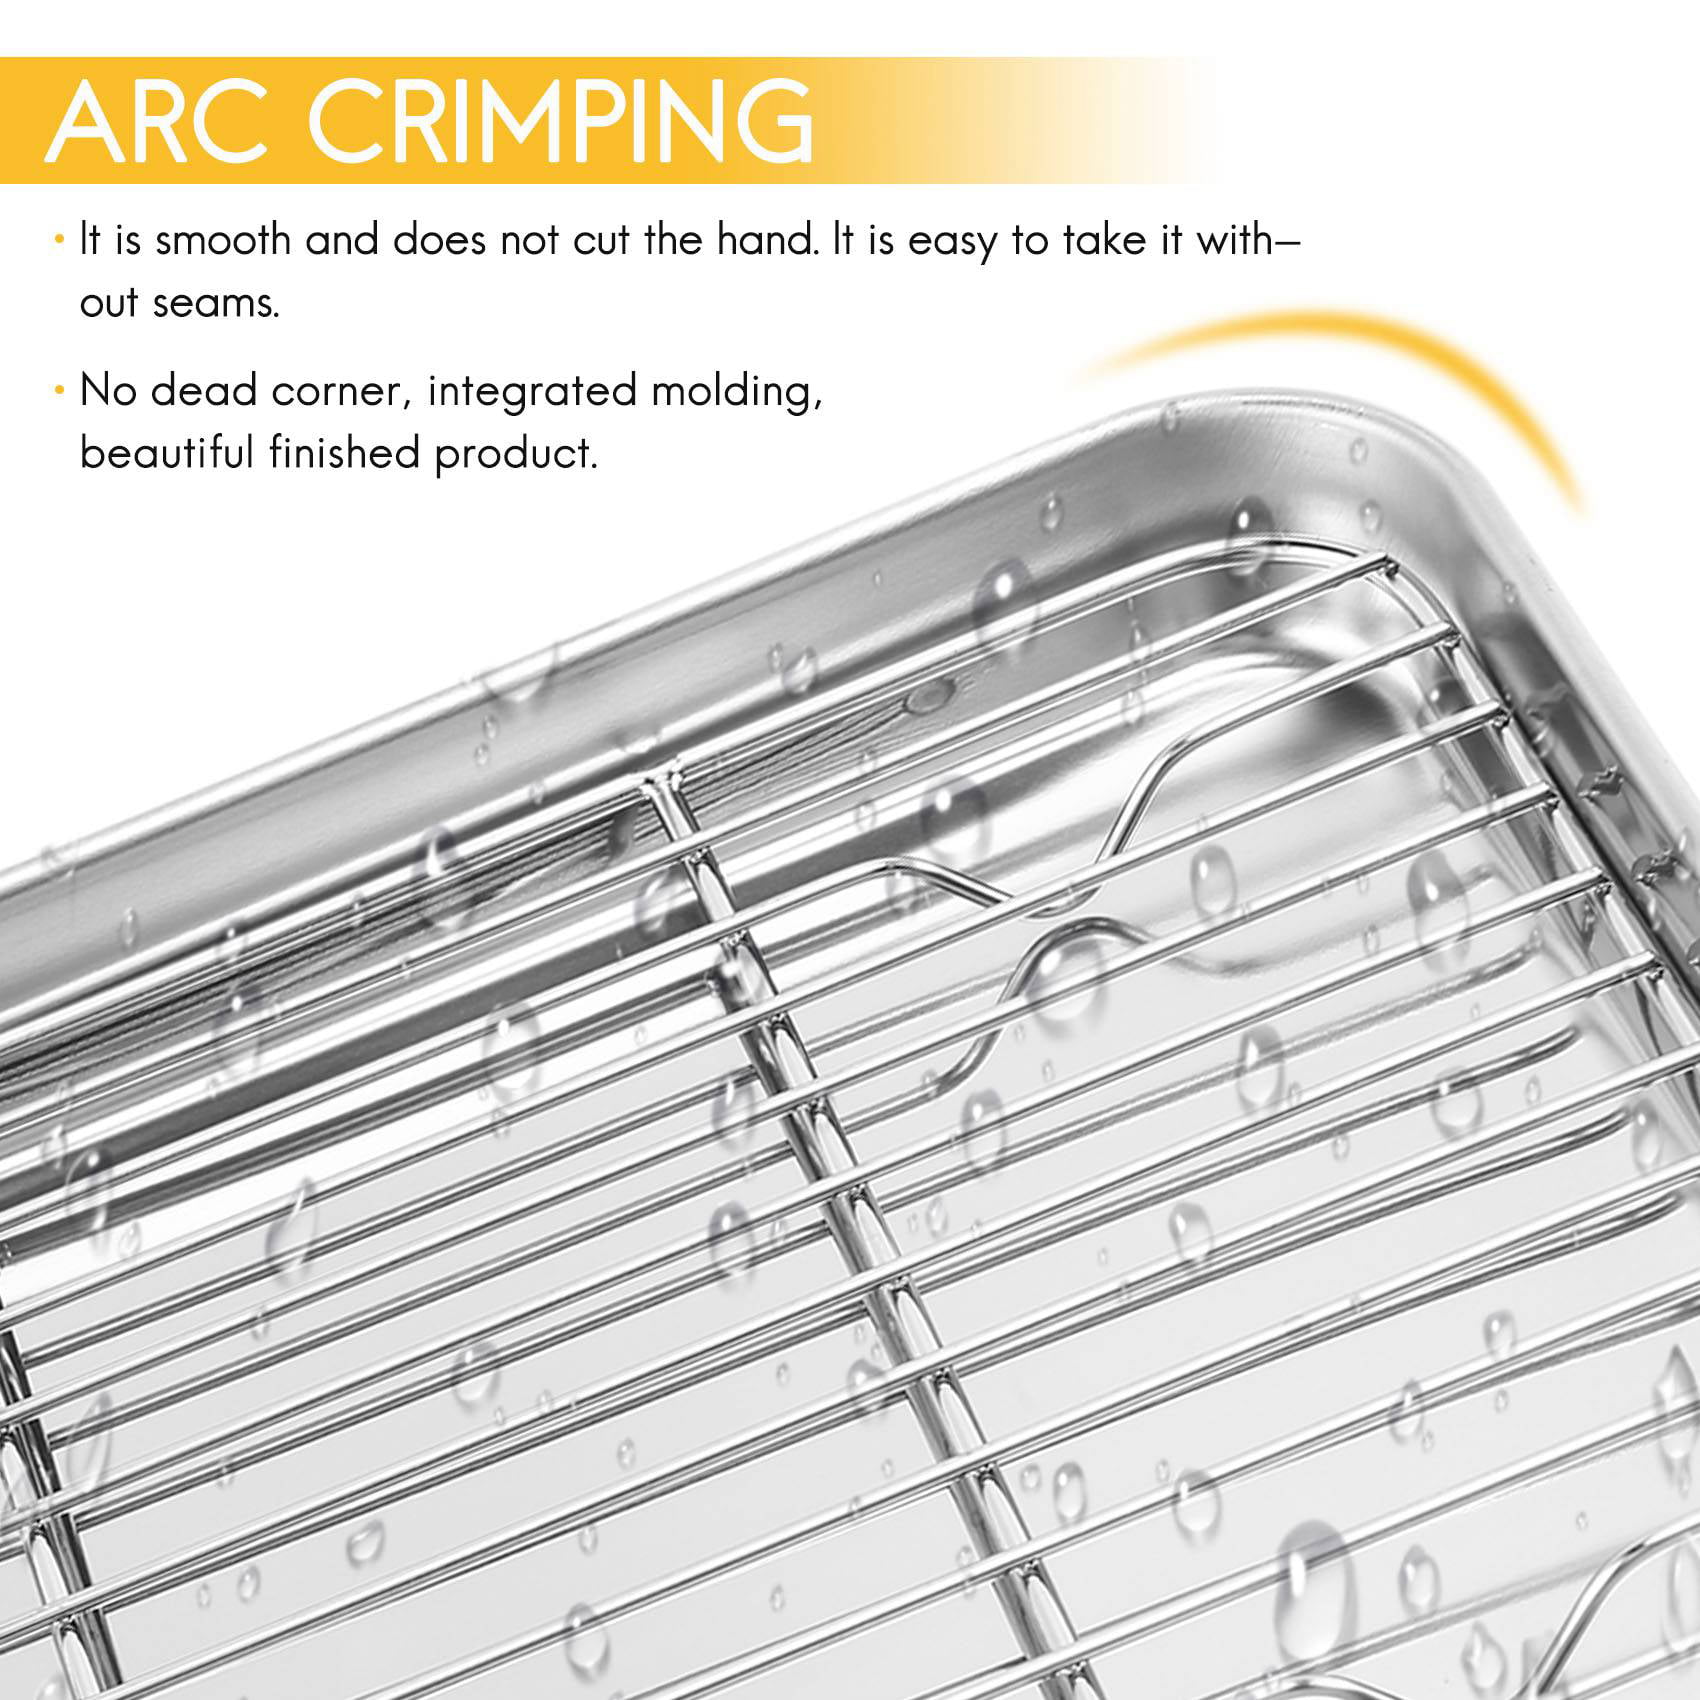 9 Inch Toaster Oven Tray and Rack Set, Small Stainless Steel Baking Pan  with Cooling Rack,Dishwasher Safe Baking Sheet - AliExpress